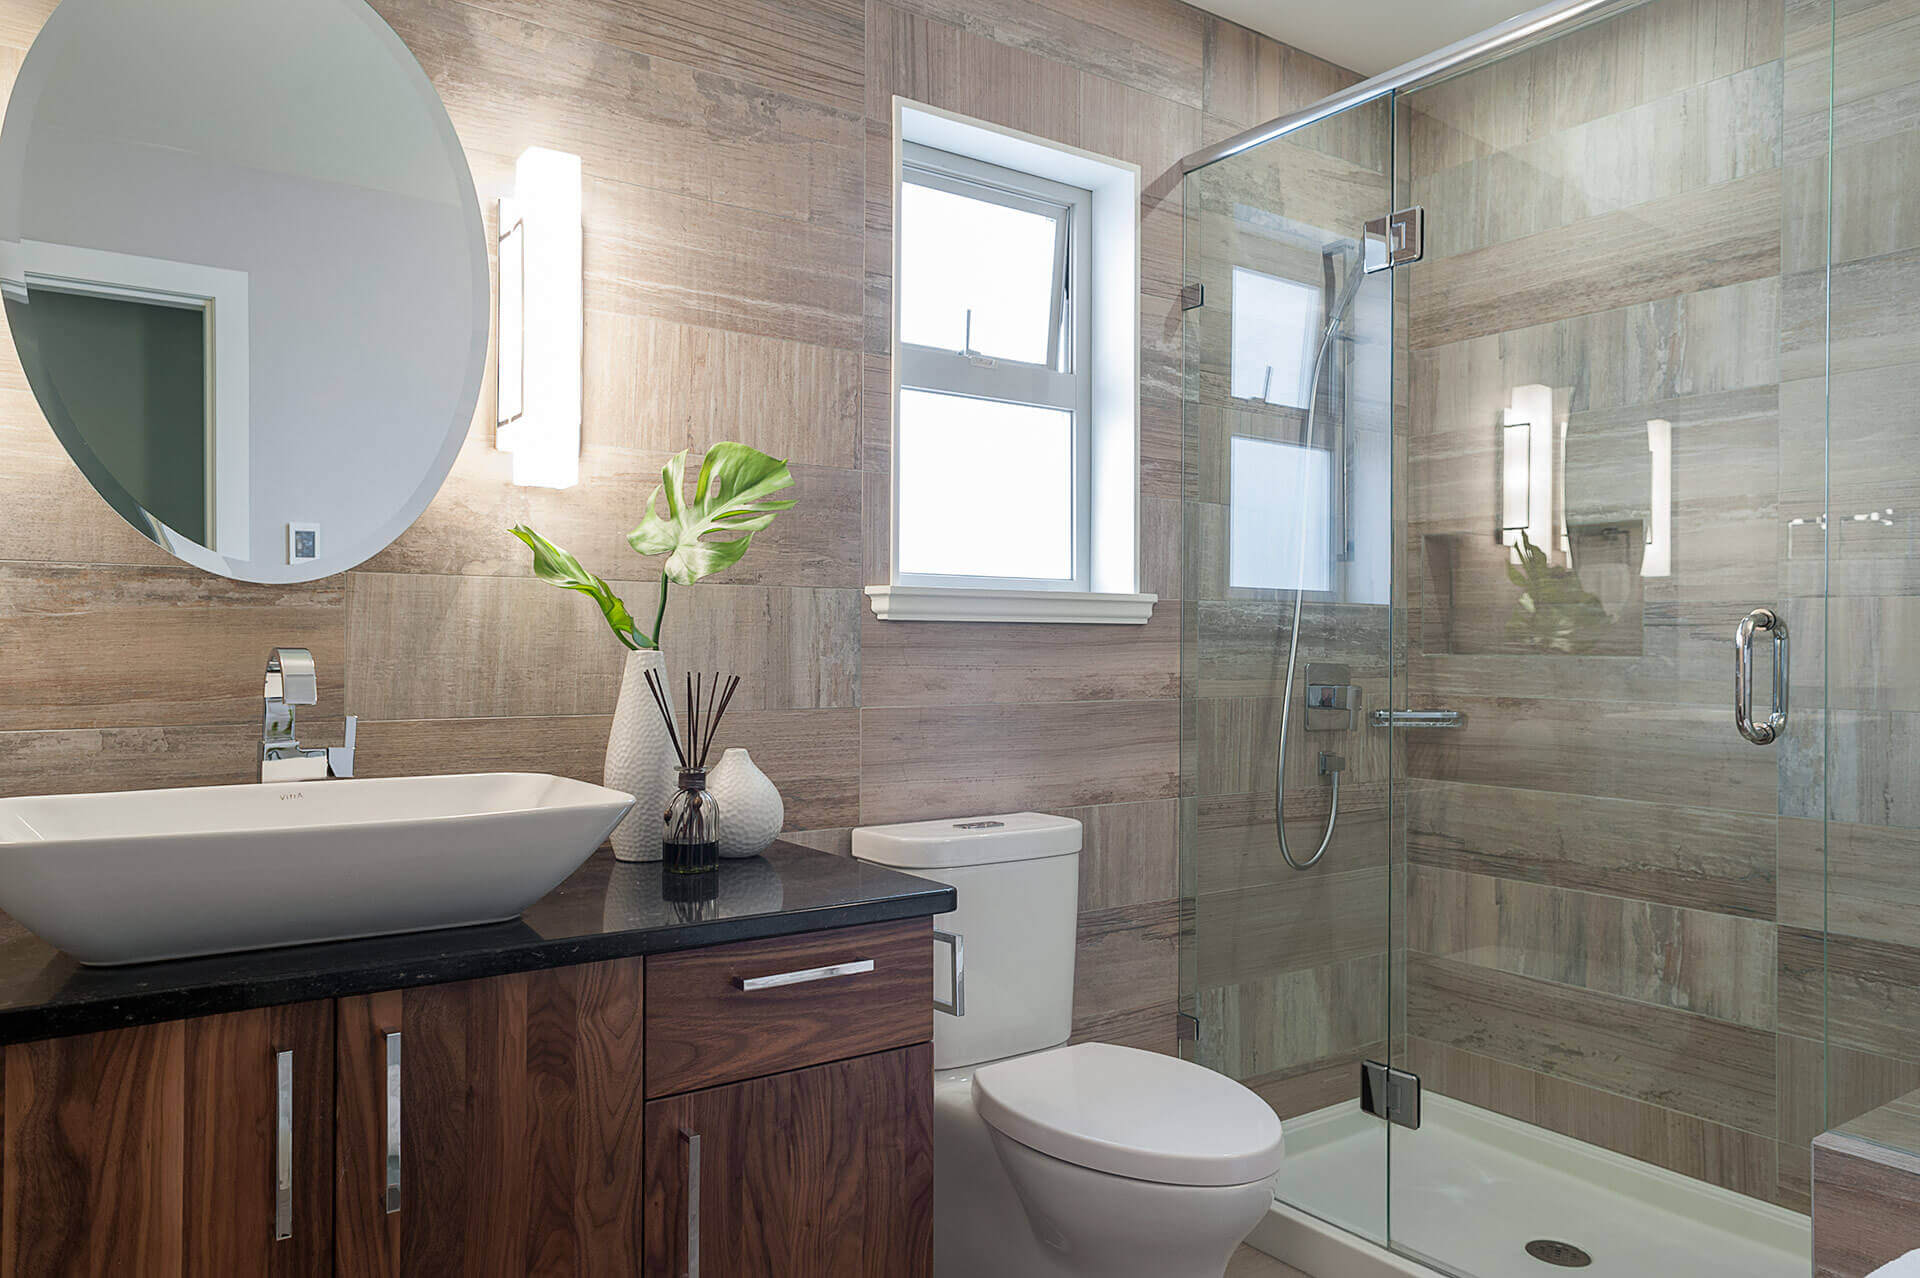 How much will a small bathroom renovation cost